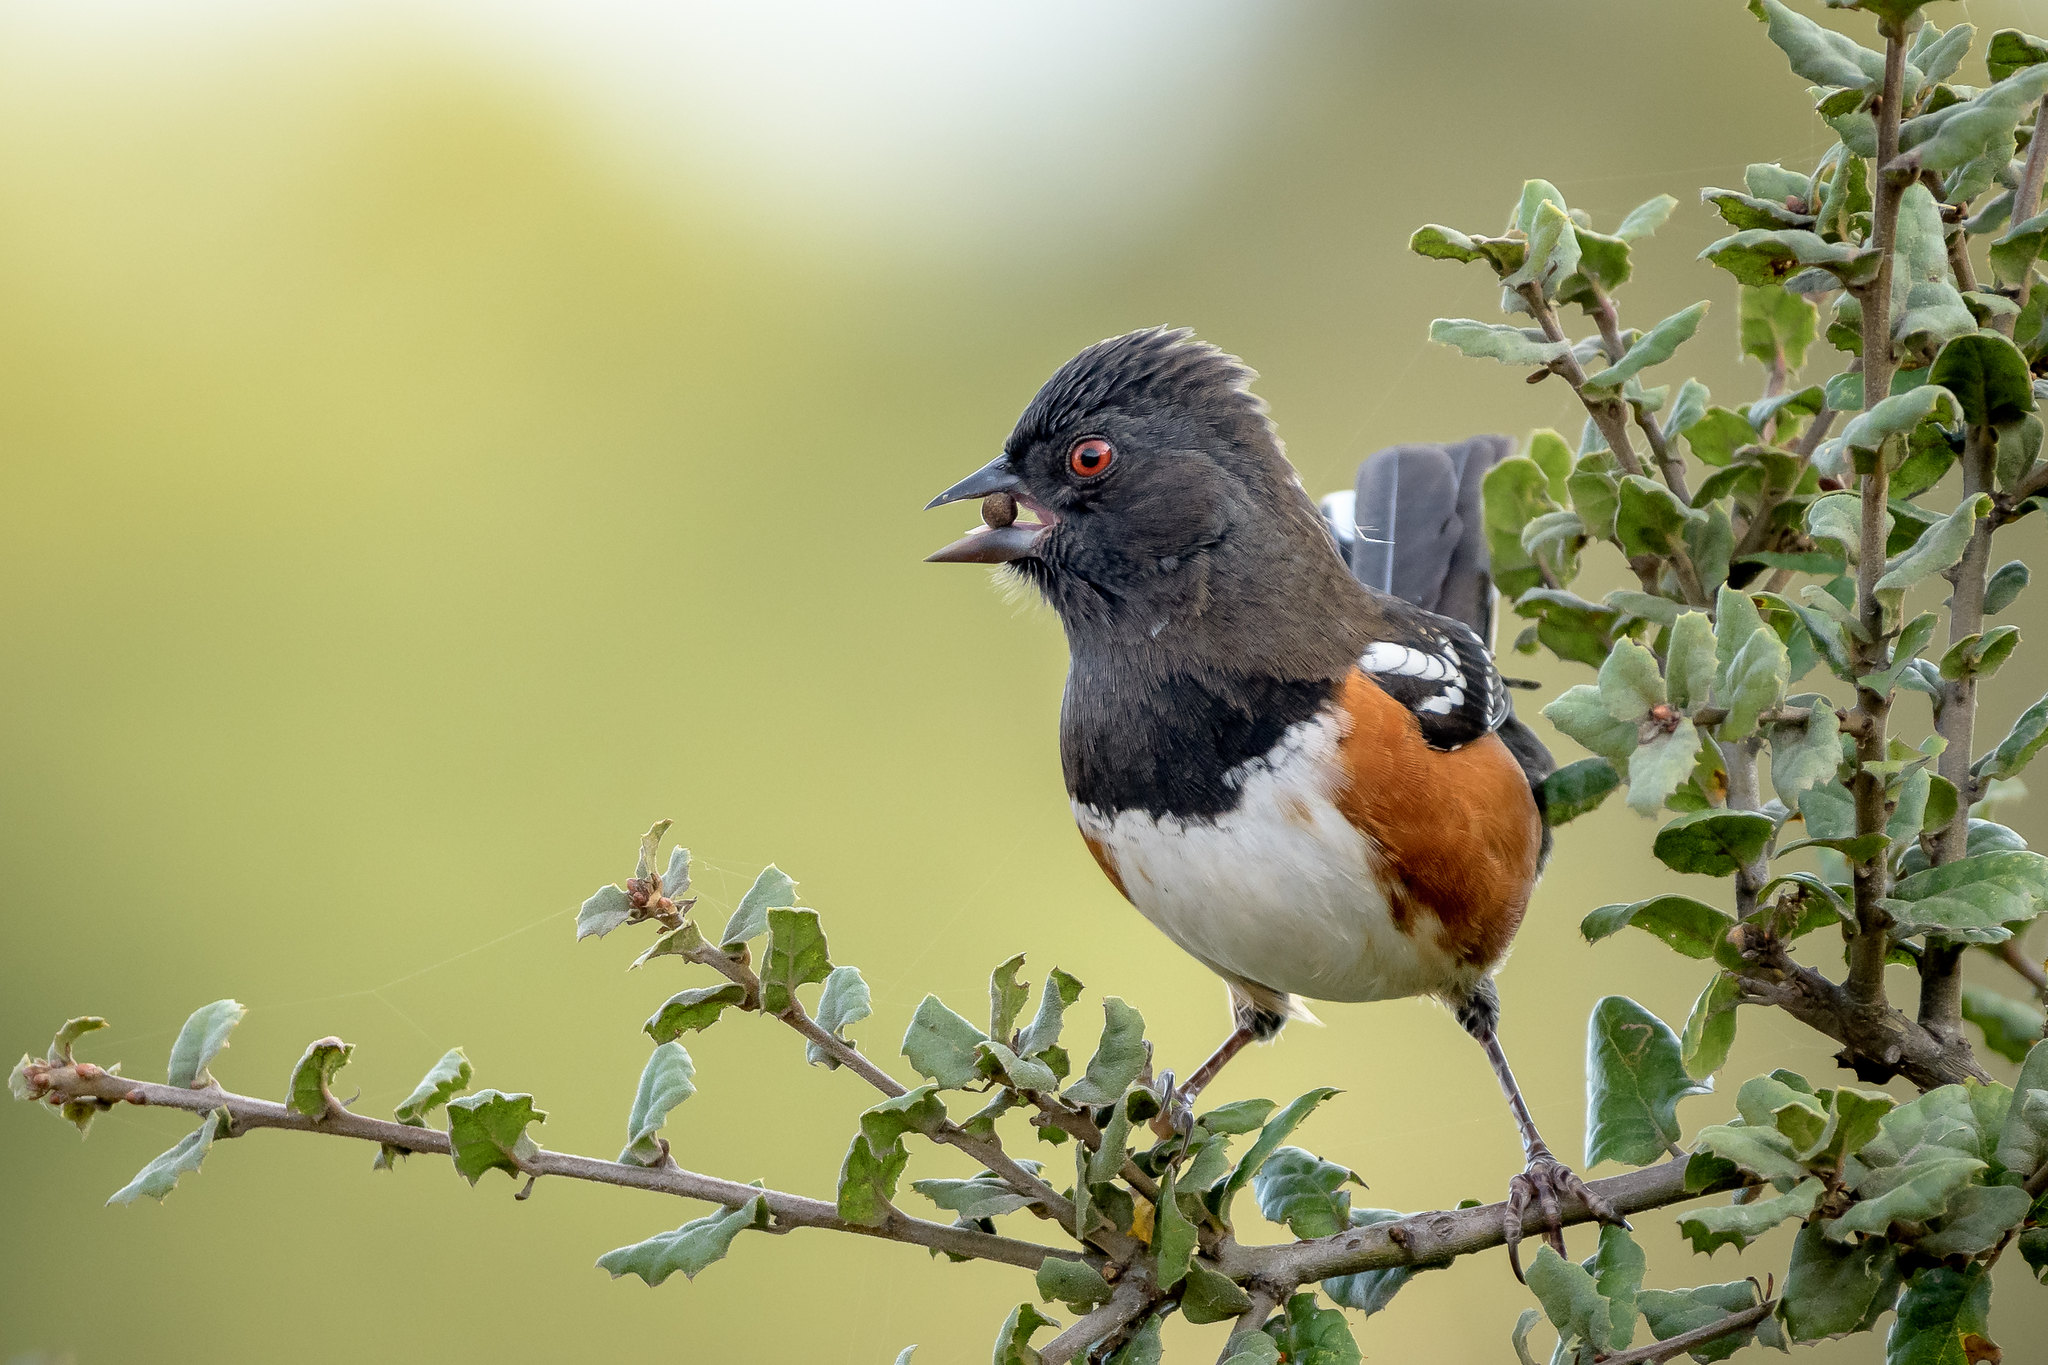 spotted_towhee_contracosta_p.blanchard_CC BY 2.0